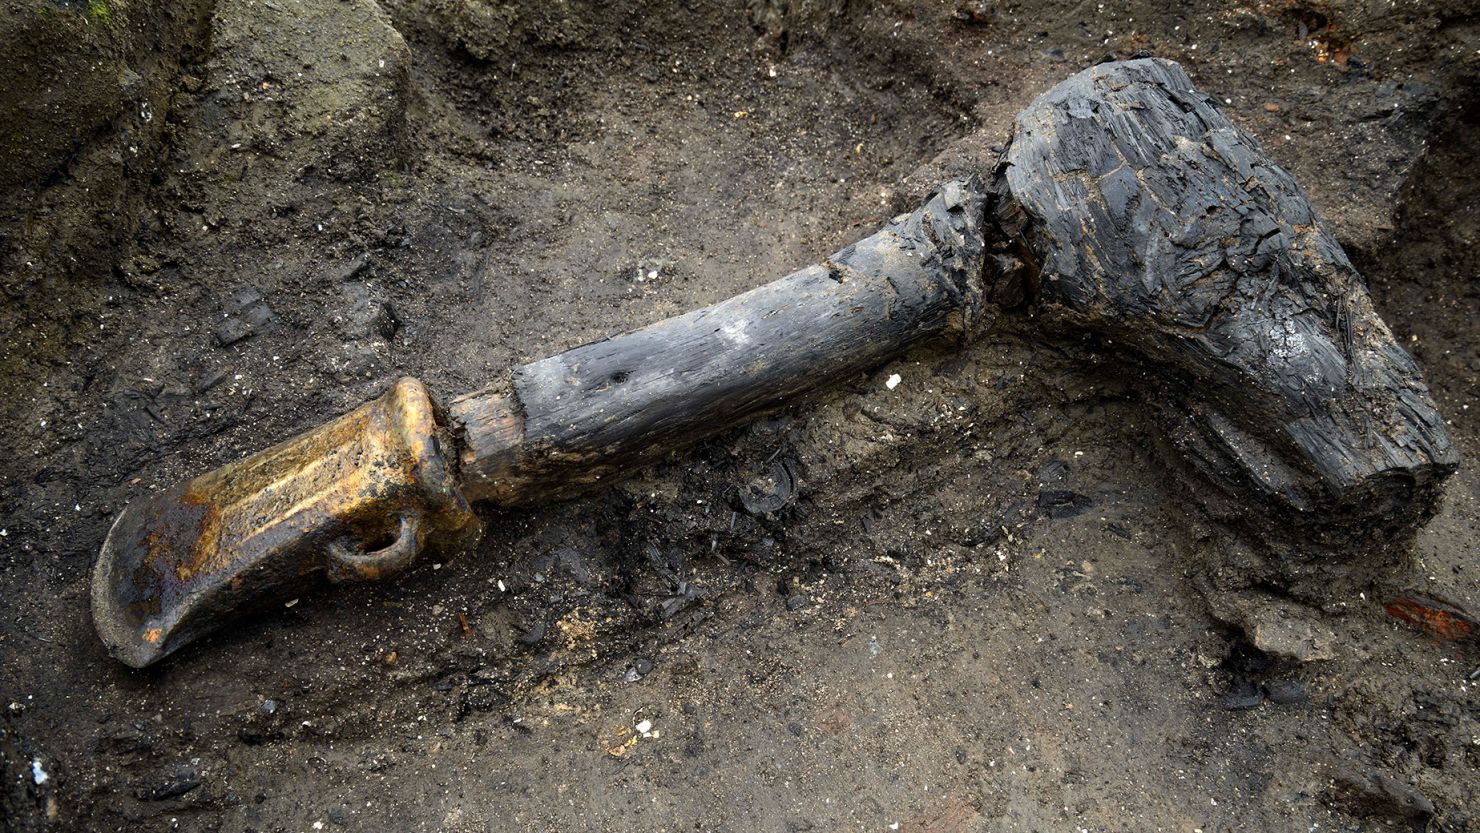 A metal axe head with wooden shaft was among the many well-preserved artifacts discovered at Must Farm, near Peterborough in the county of Cambridgeshire in England.